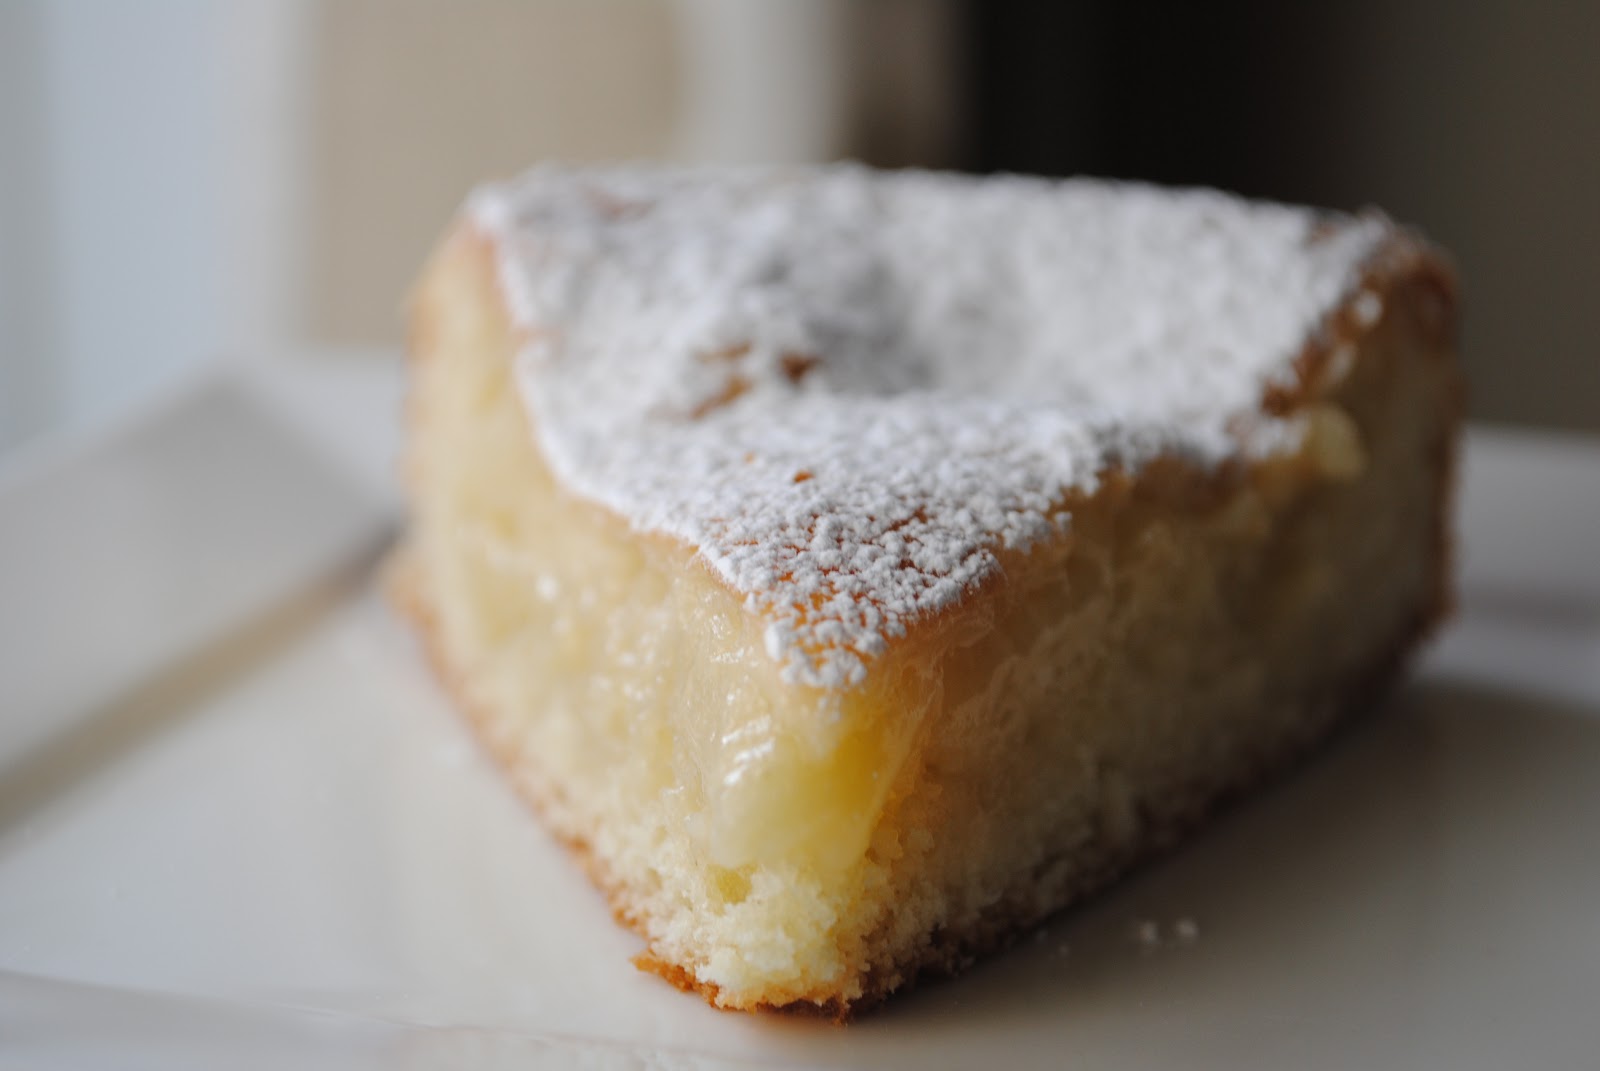 Sweet State of Mine: Missouri - Gooey Butter Cake (Old St. Louis Bakery Style)